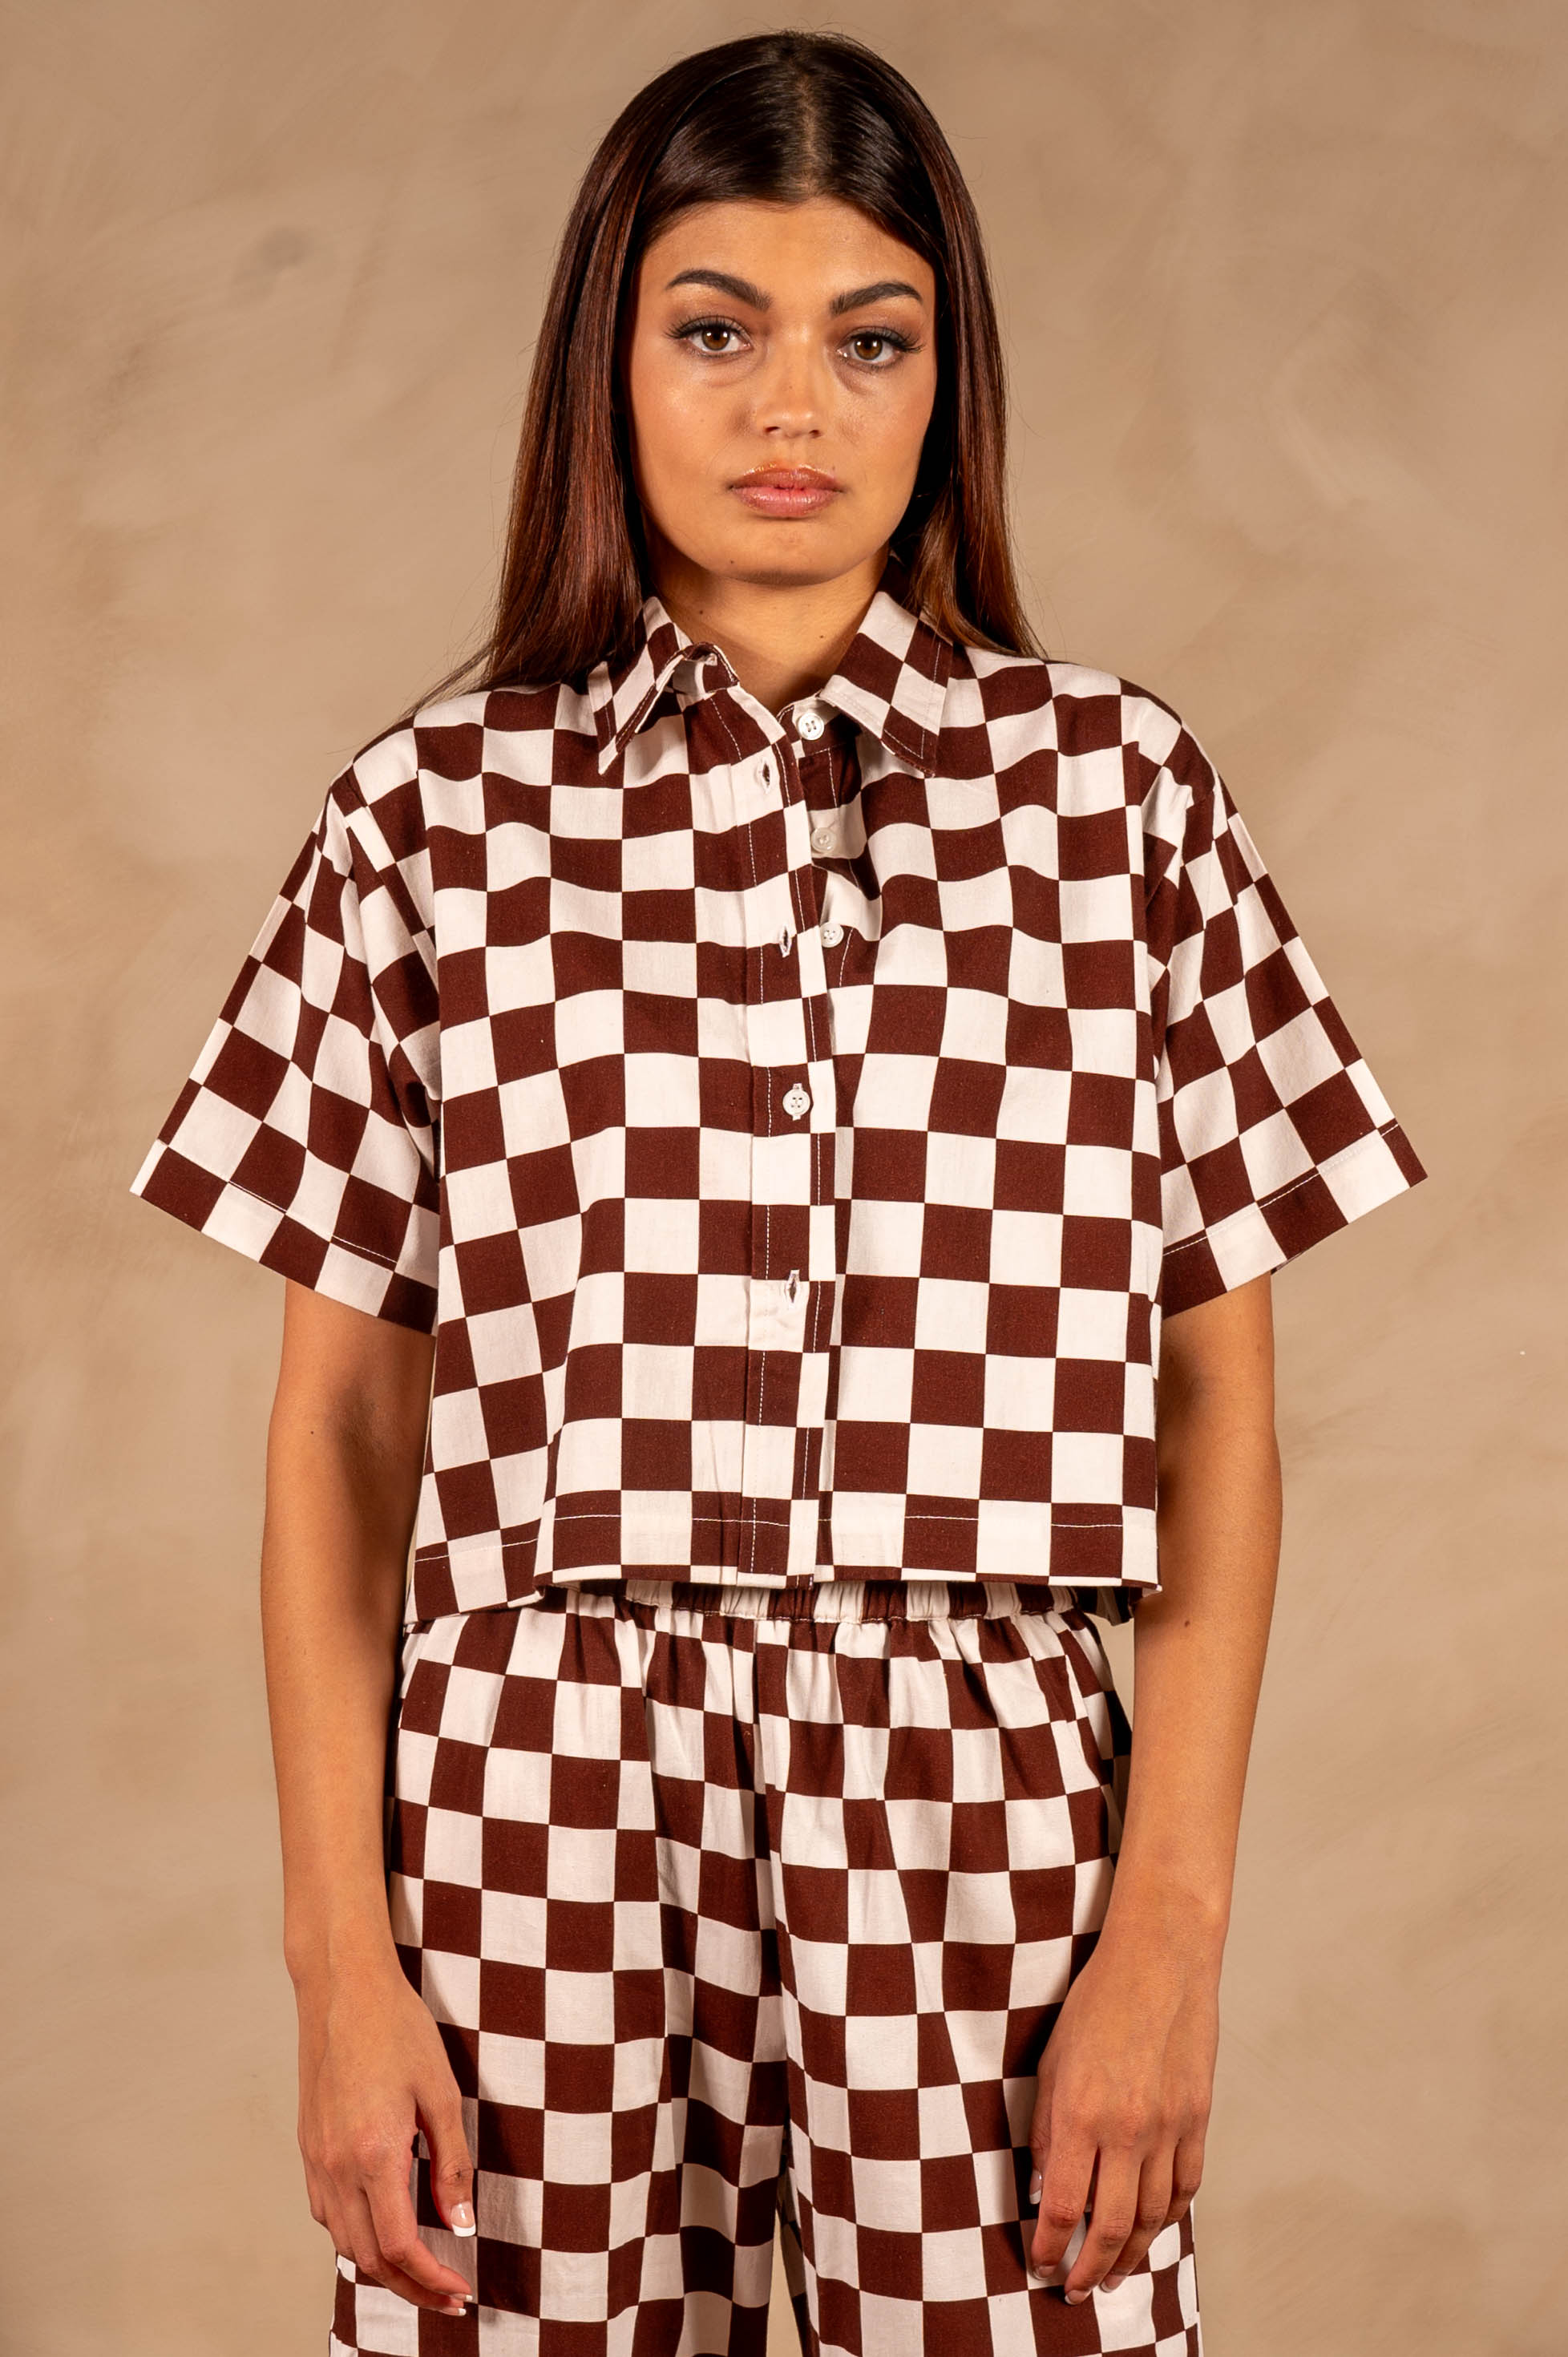 Hand Printed 'The Cami' Crop Shirt in Chocolate and White Chessboard